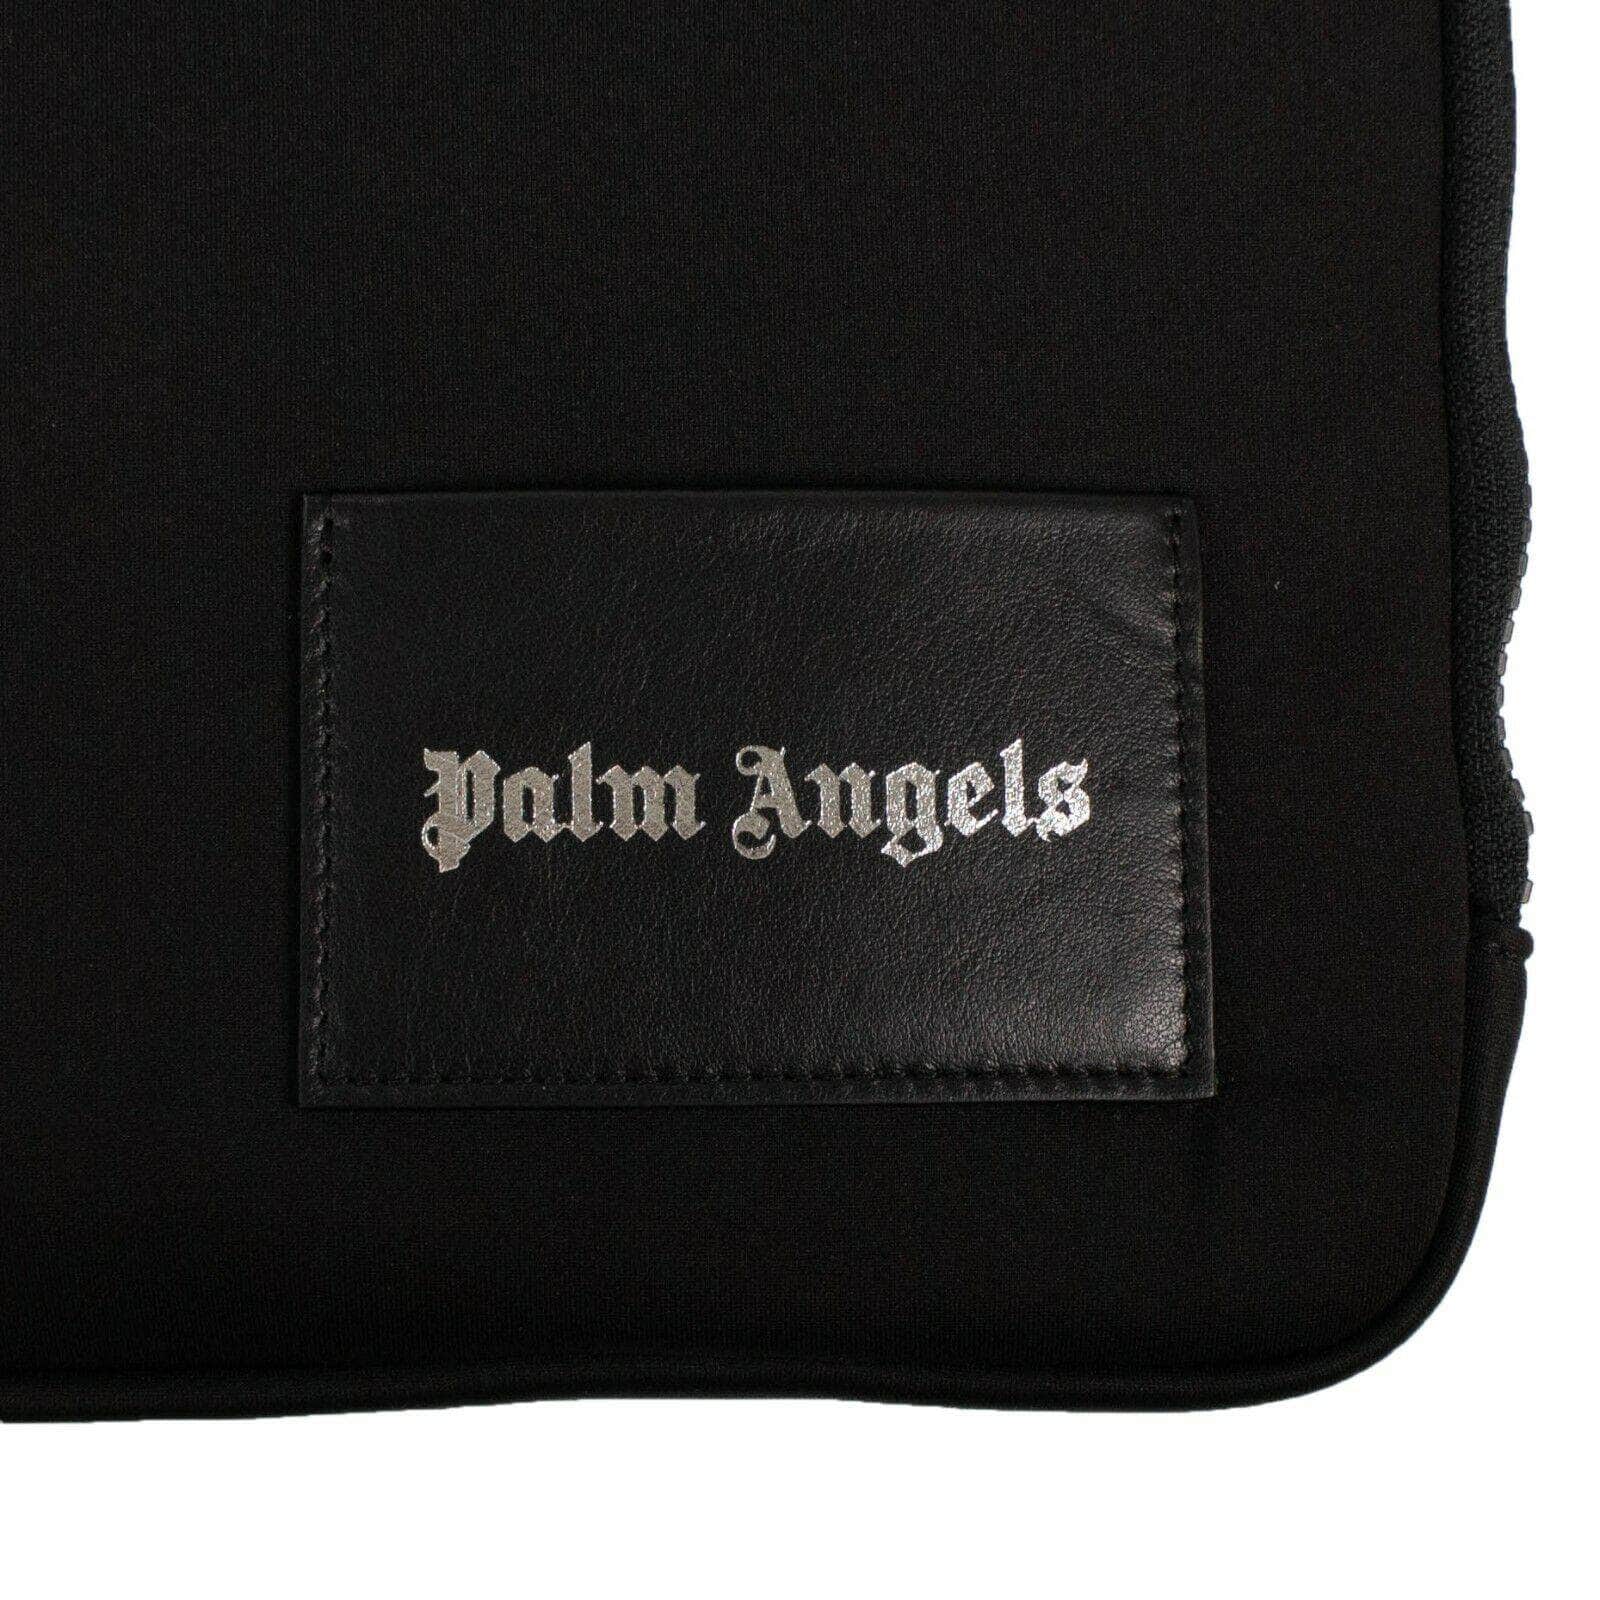 PALM ANGELS 250-500, couponcollection, gender-mens, main-accessories, palm-angels, size-os OS Black Logo Patch IPad Case Pouch 82NGG-PA-3058 82NGG-PA-3058